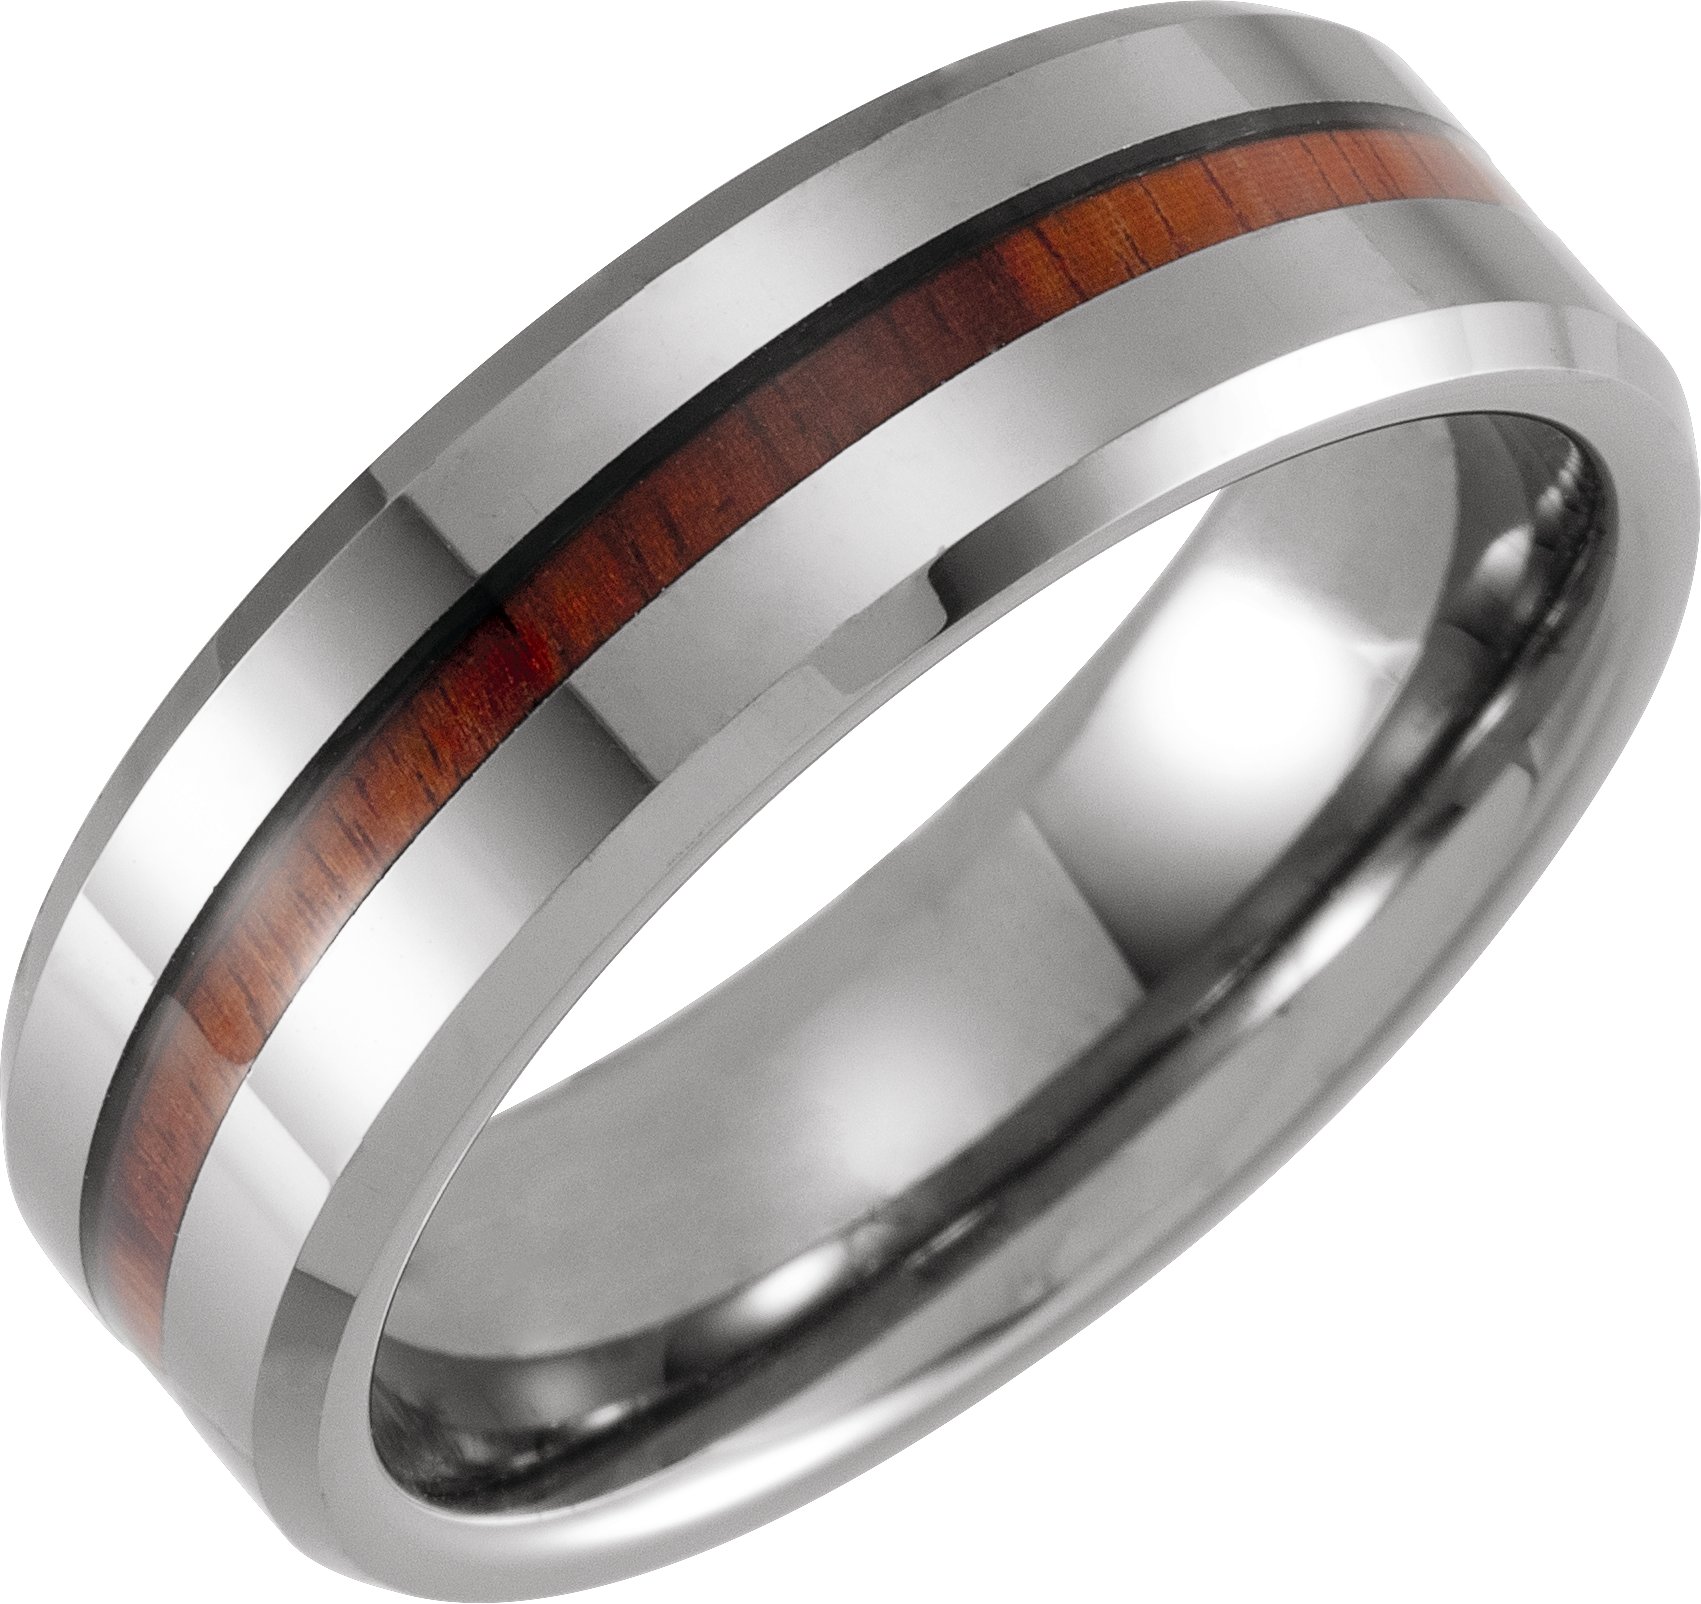 Tungsten 8 mm Beveled Band with Acacia Wood Inlay Size 7.5